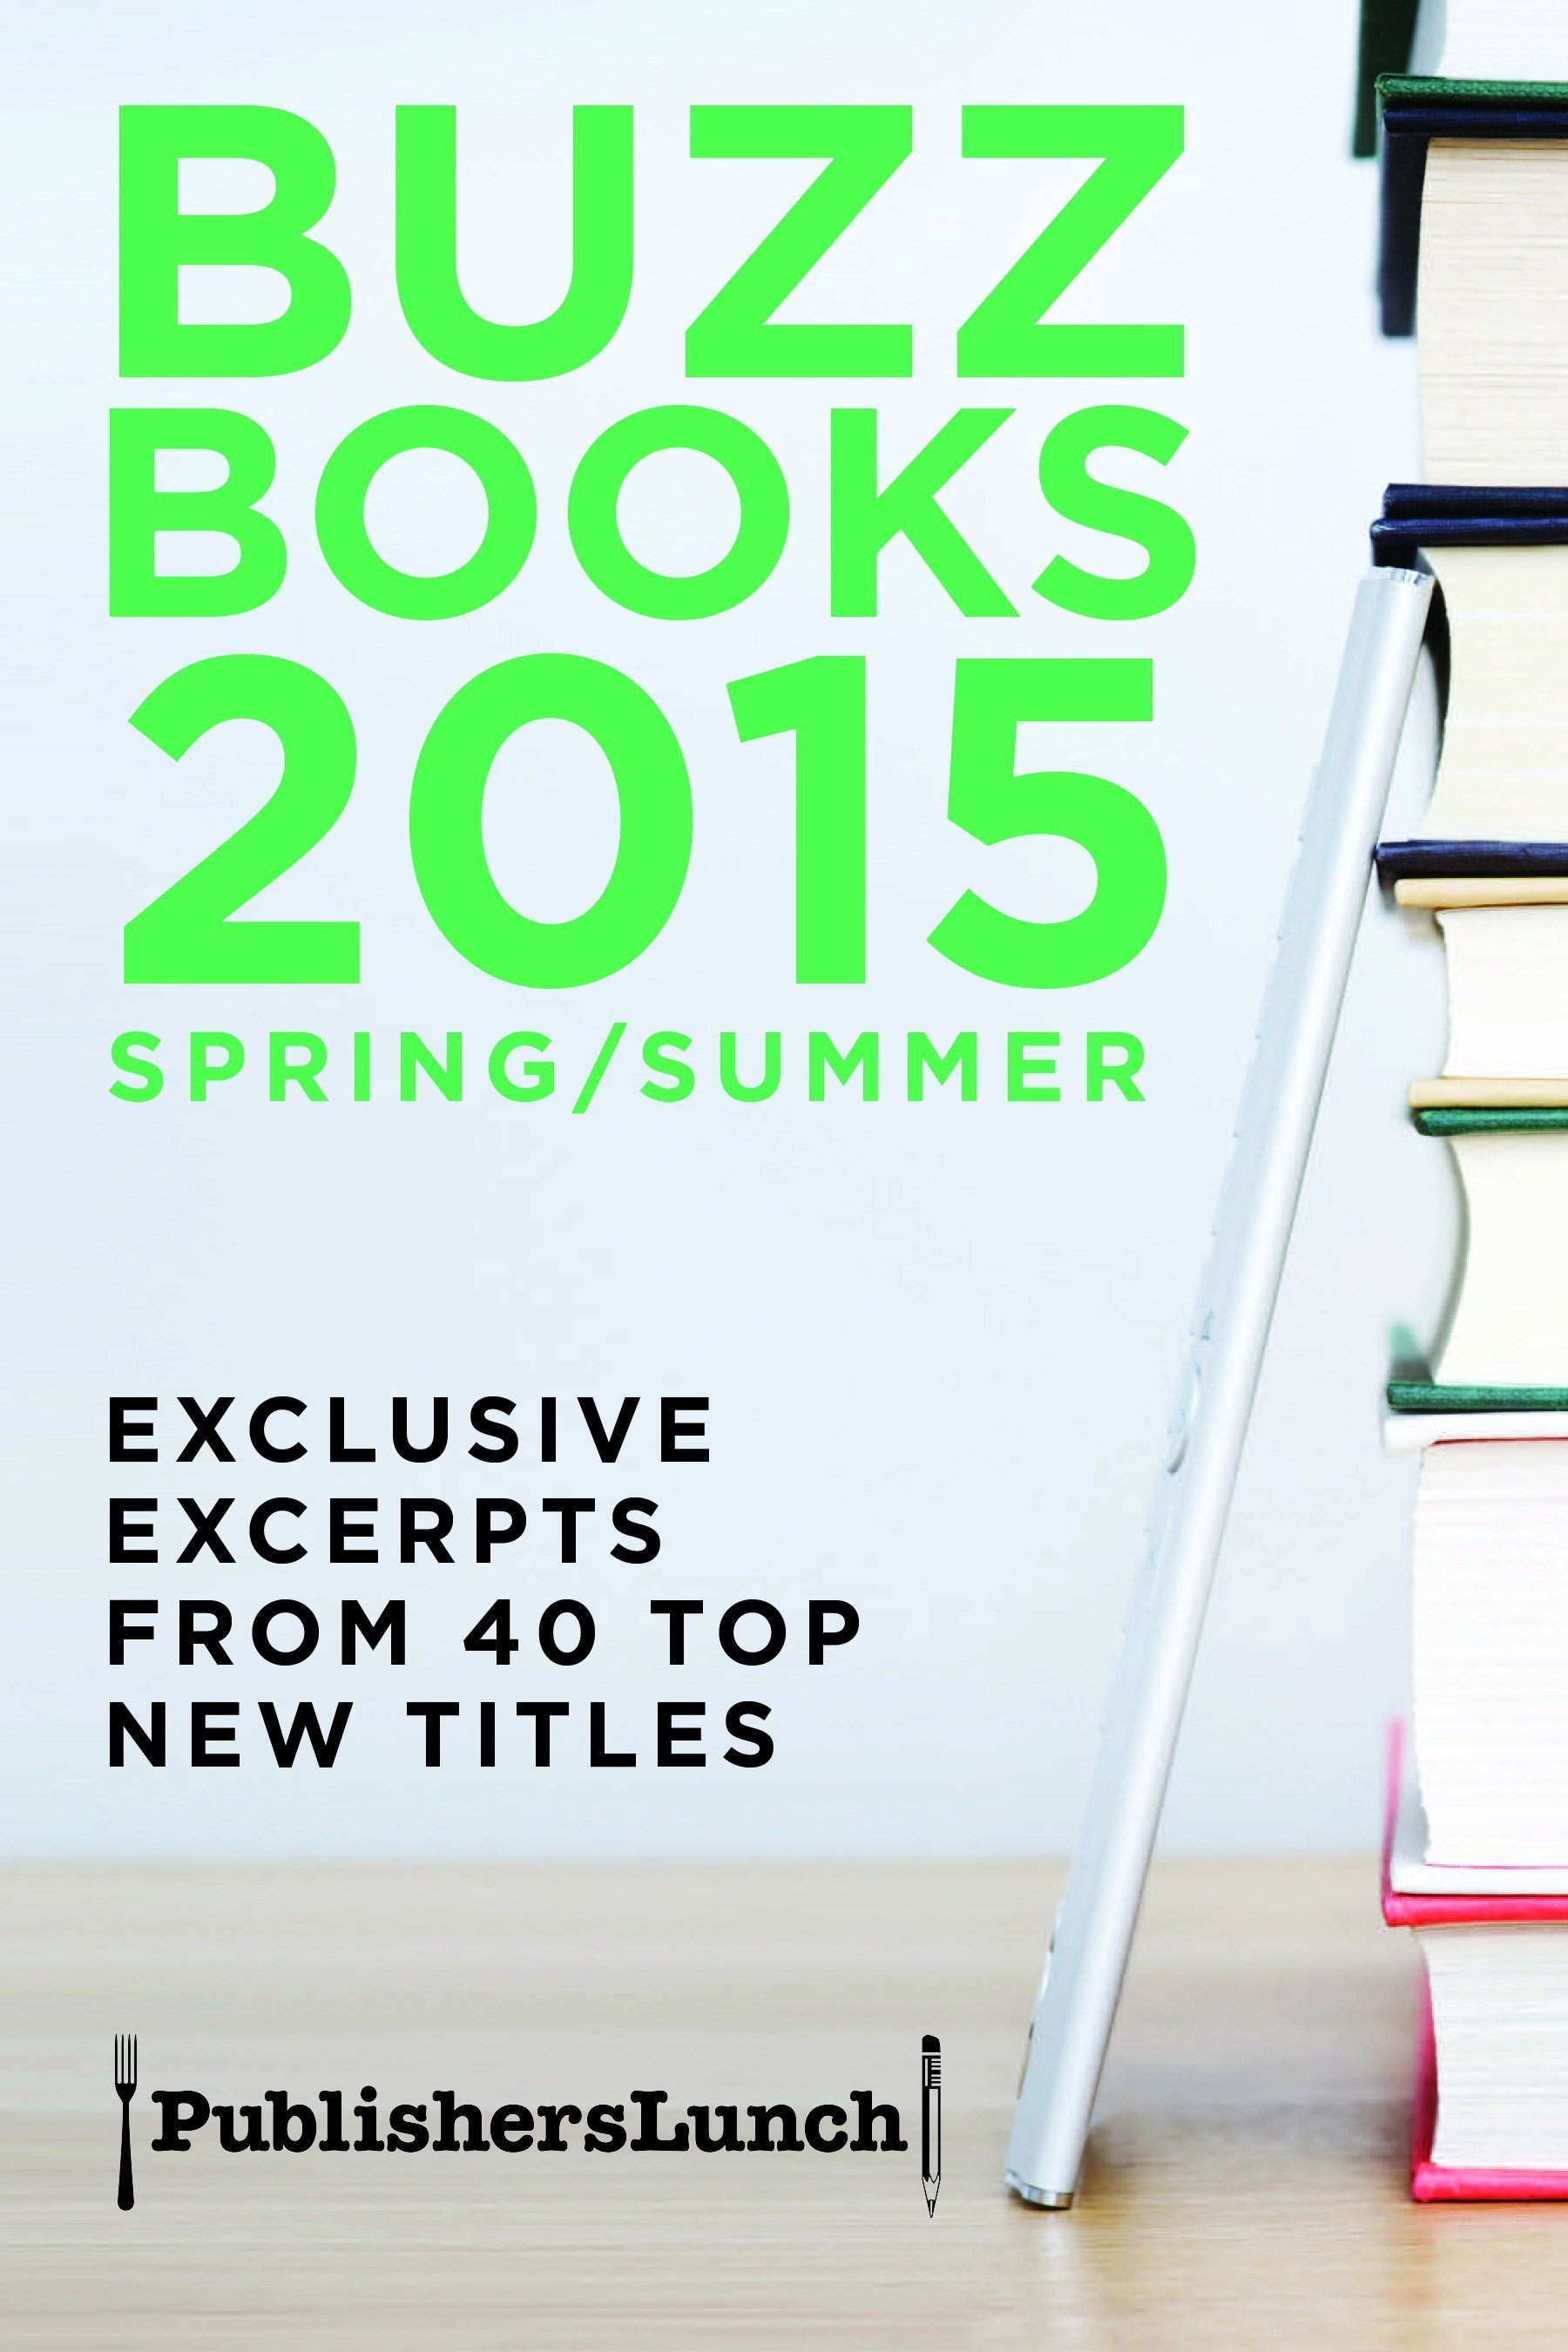 Enjoy an early first look at books from bestselling authors in Buzz Books 2015